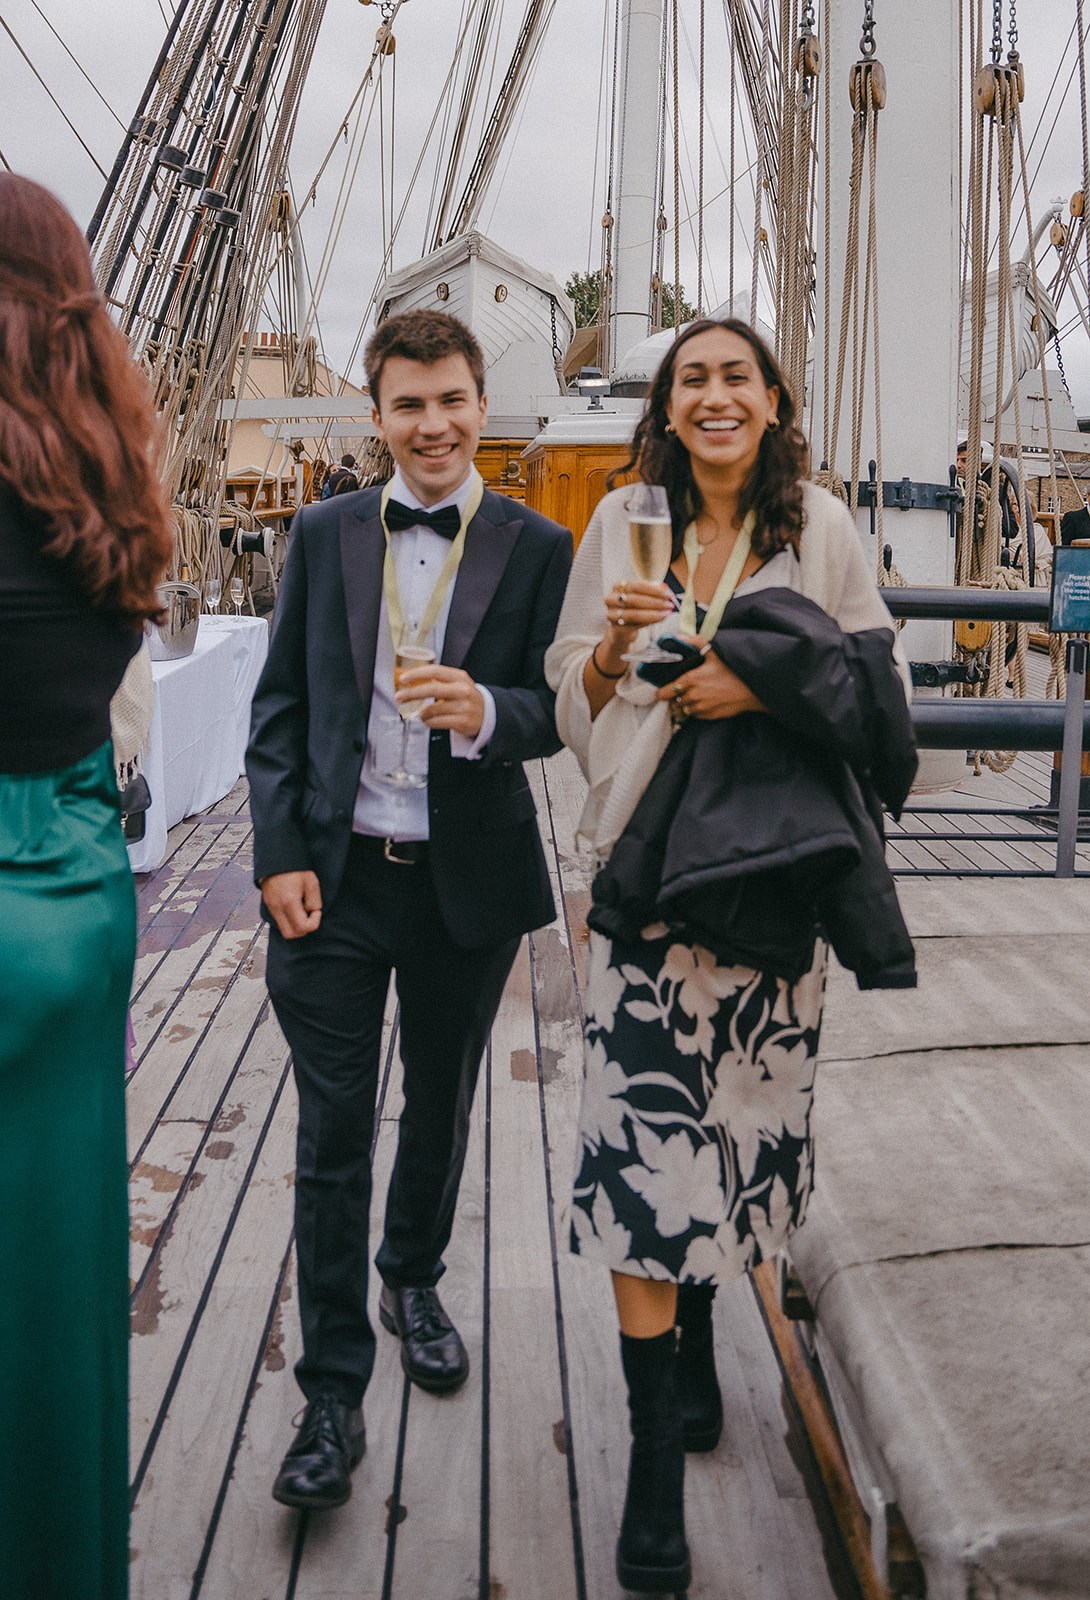 Scholars walk into the event on the deck of the ship with champagne in hand